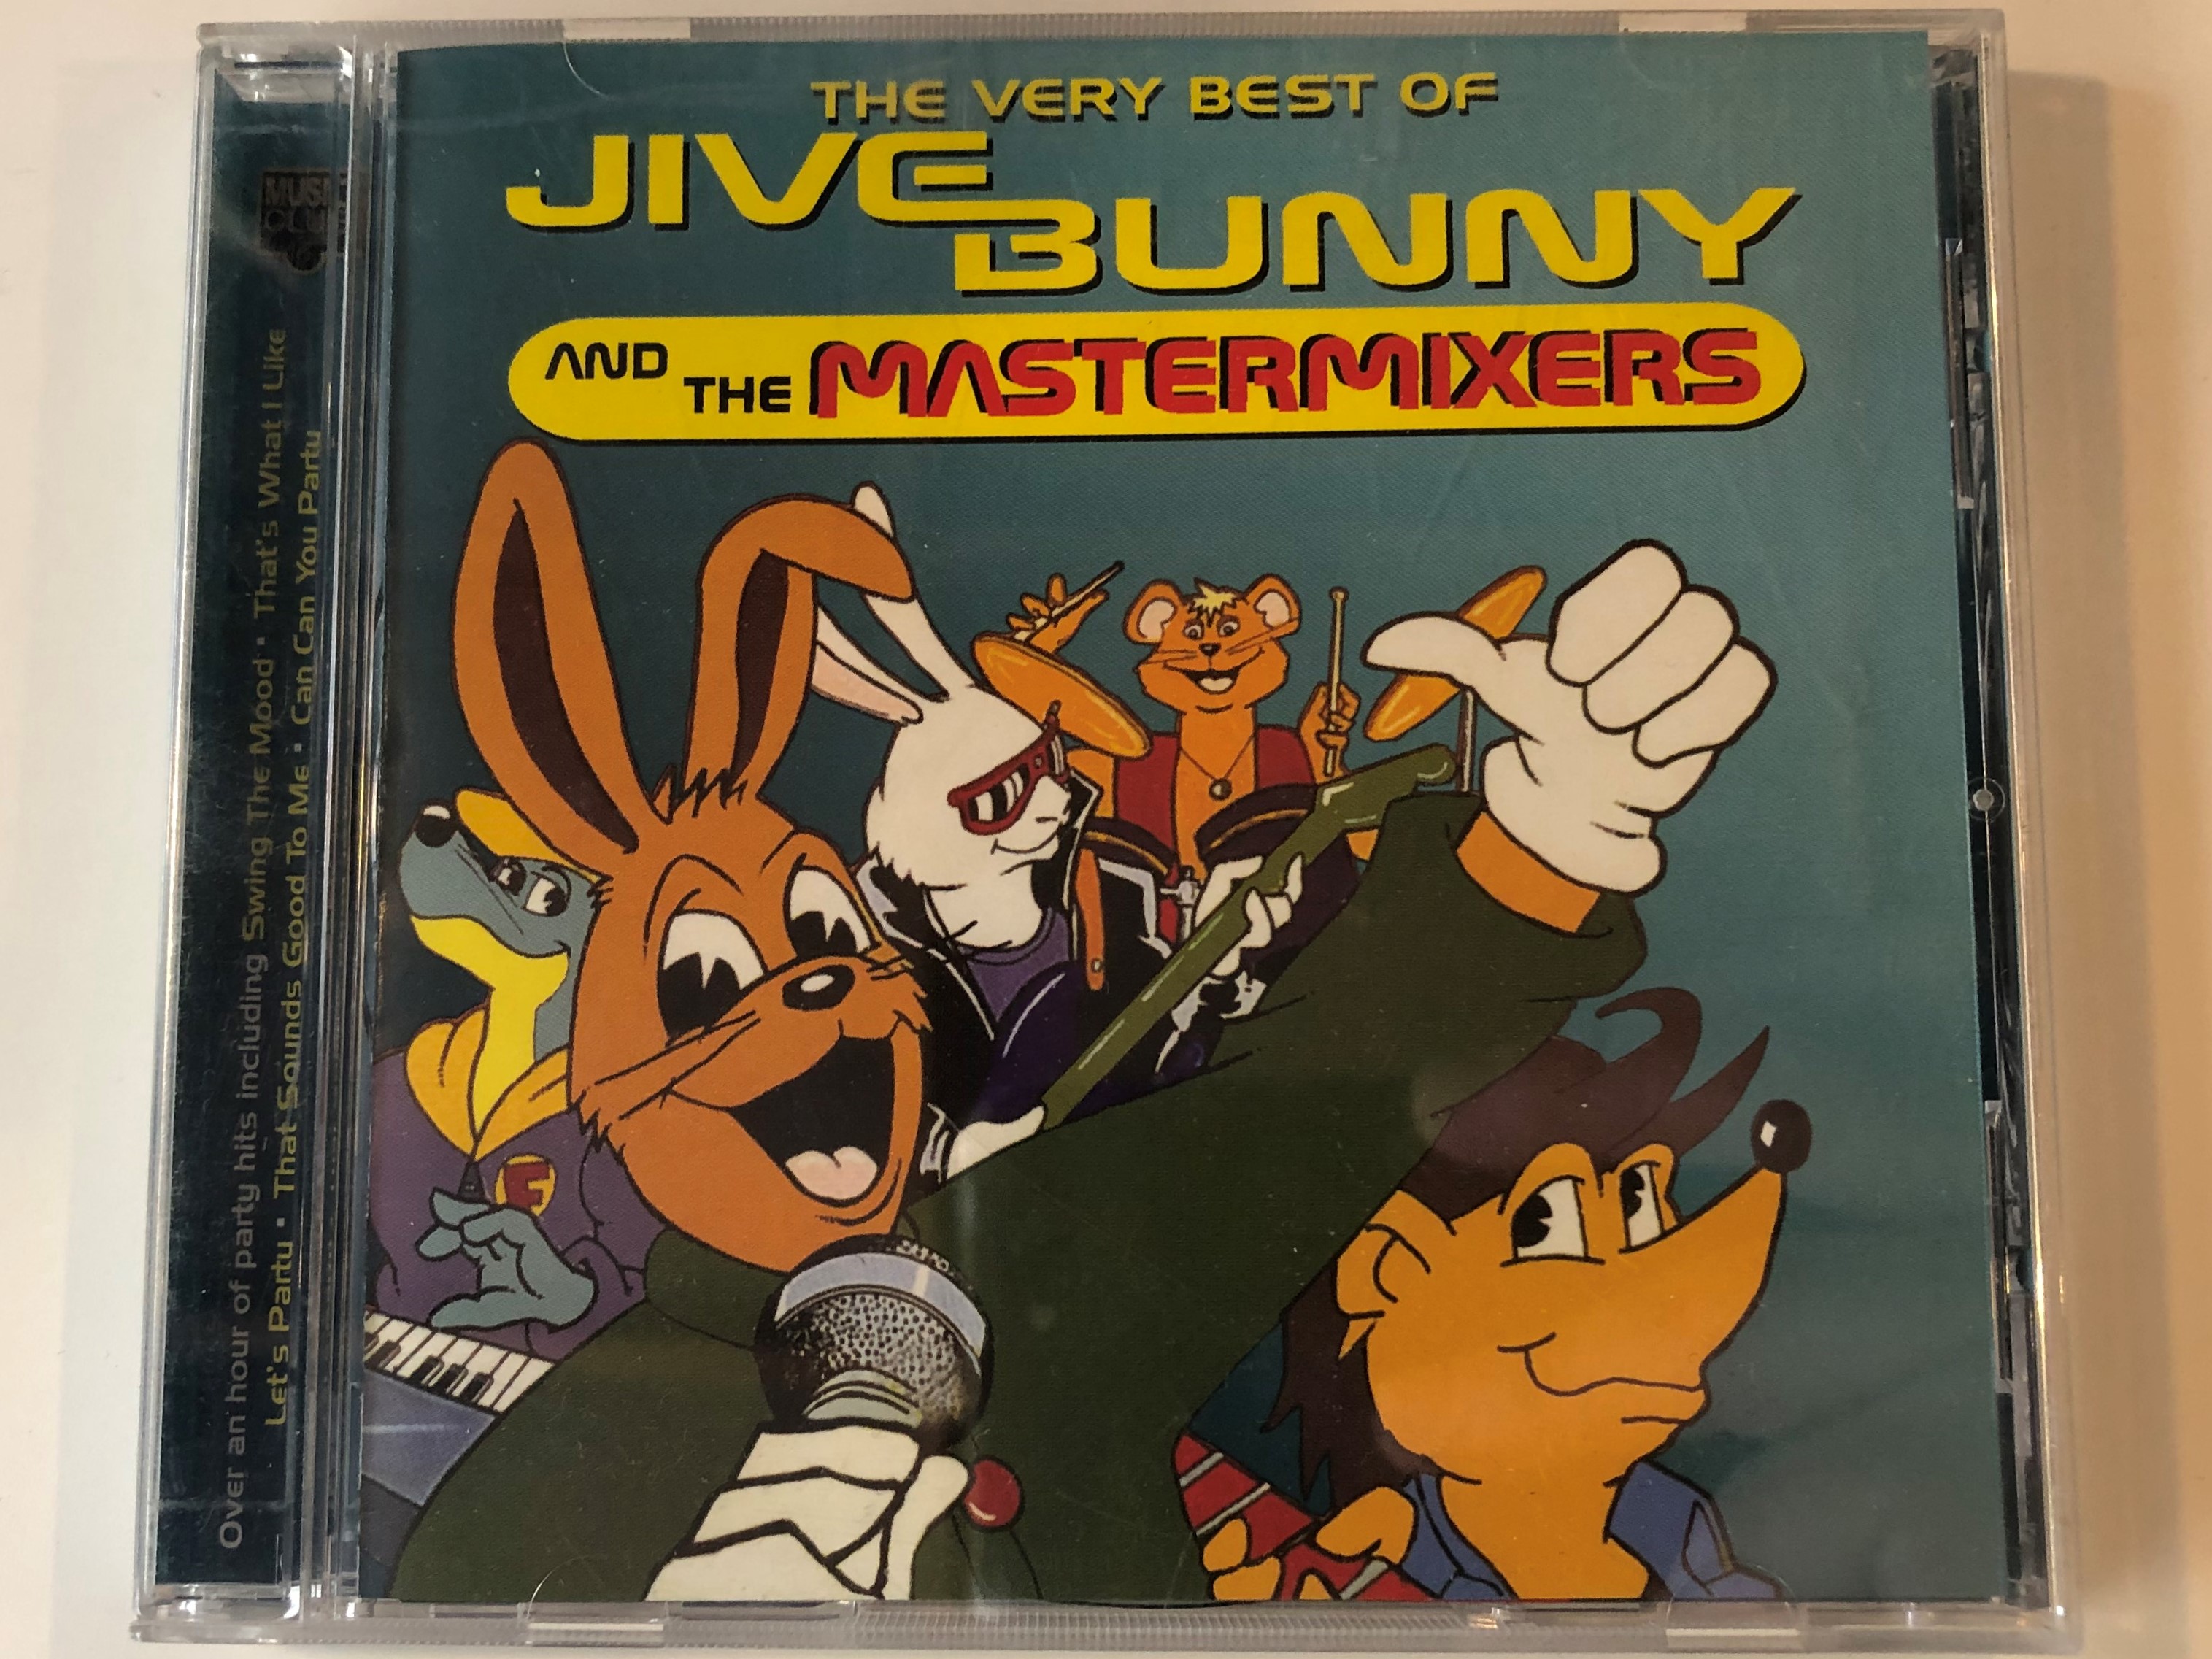 the-very-best-of-jive-bunny-and-the-mastermixers-over-an-hour-of-party-hits-including-swing-the-mood-that-s-what-i-like-let-s-party-that-sounds-good-to-me-can-can-you-party-music-club-au-1-.jpg